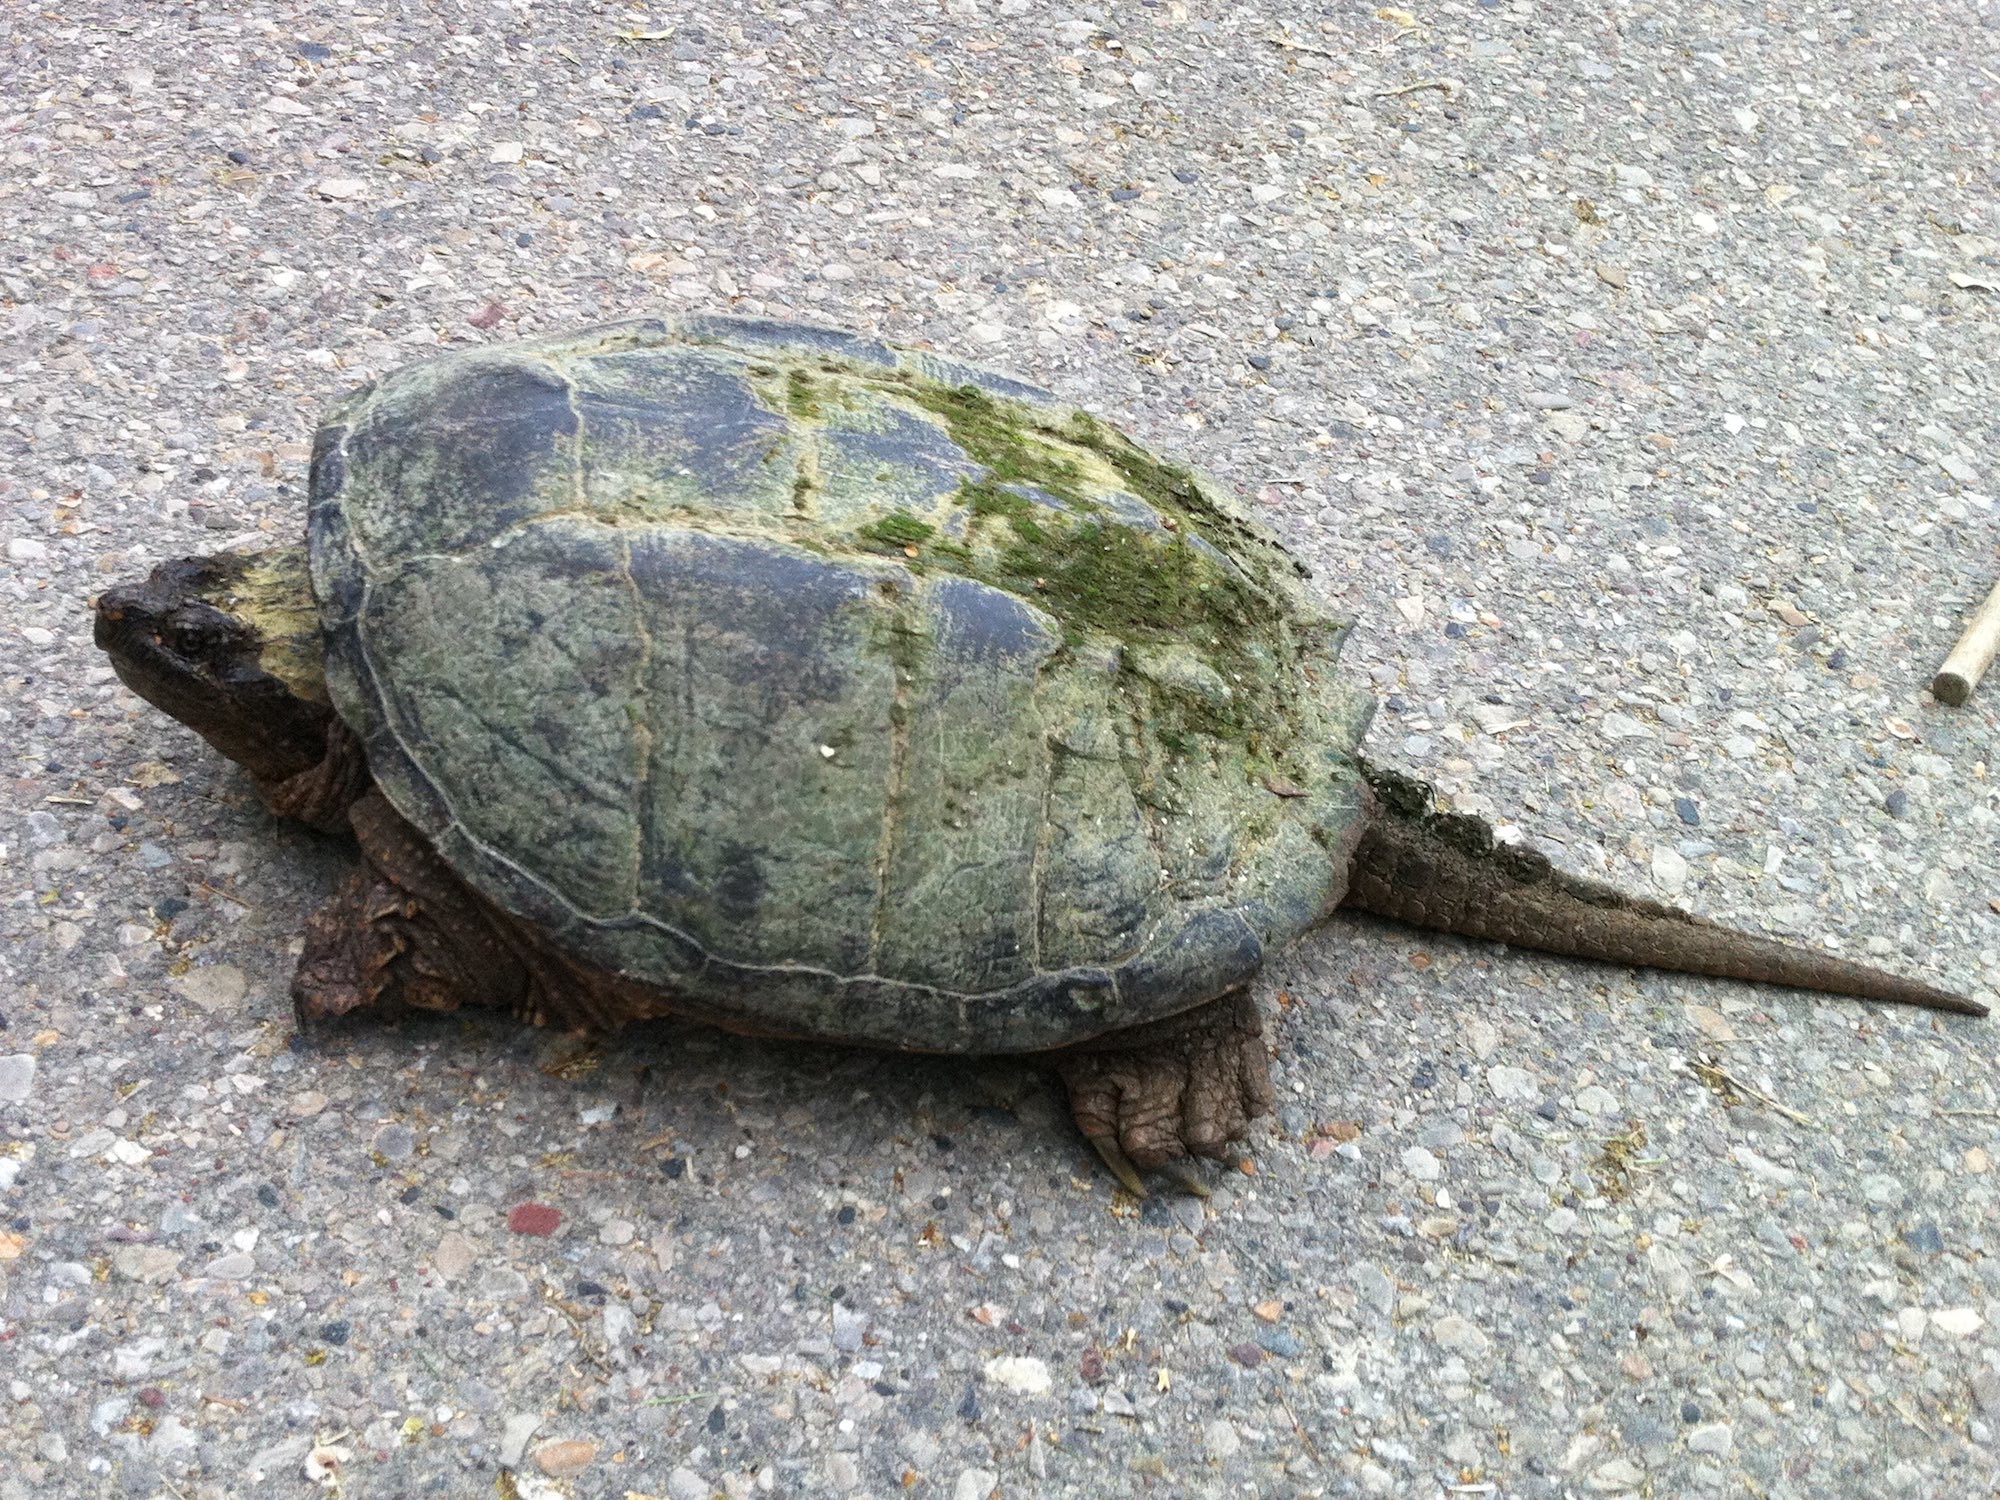 Snapping Turtle walking on Arbor Drive in Madison, Wisconsin on June 5, 2015.